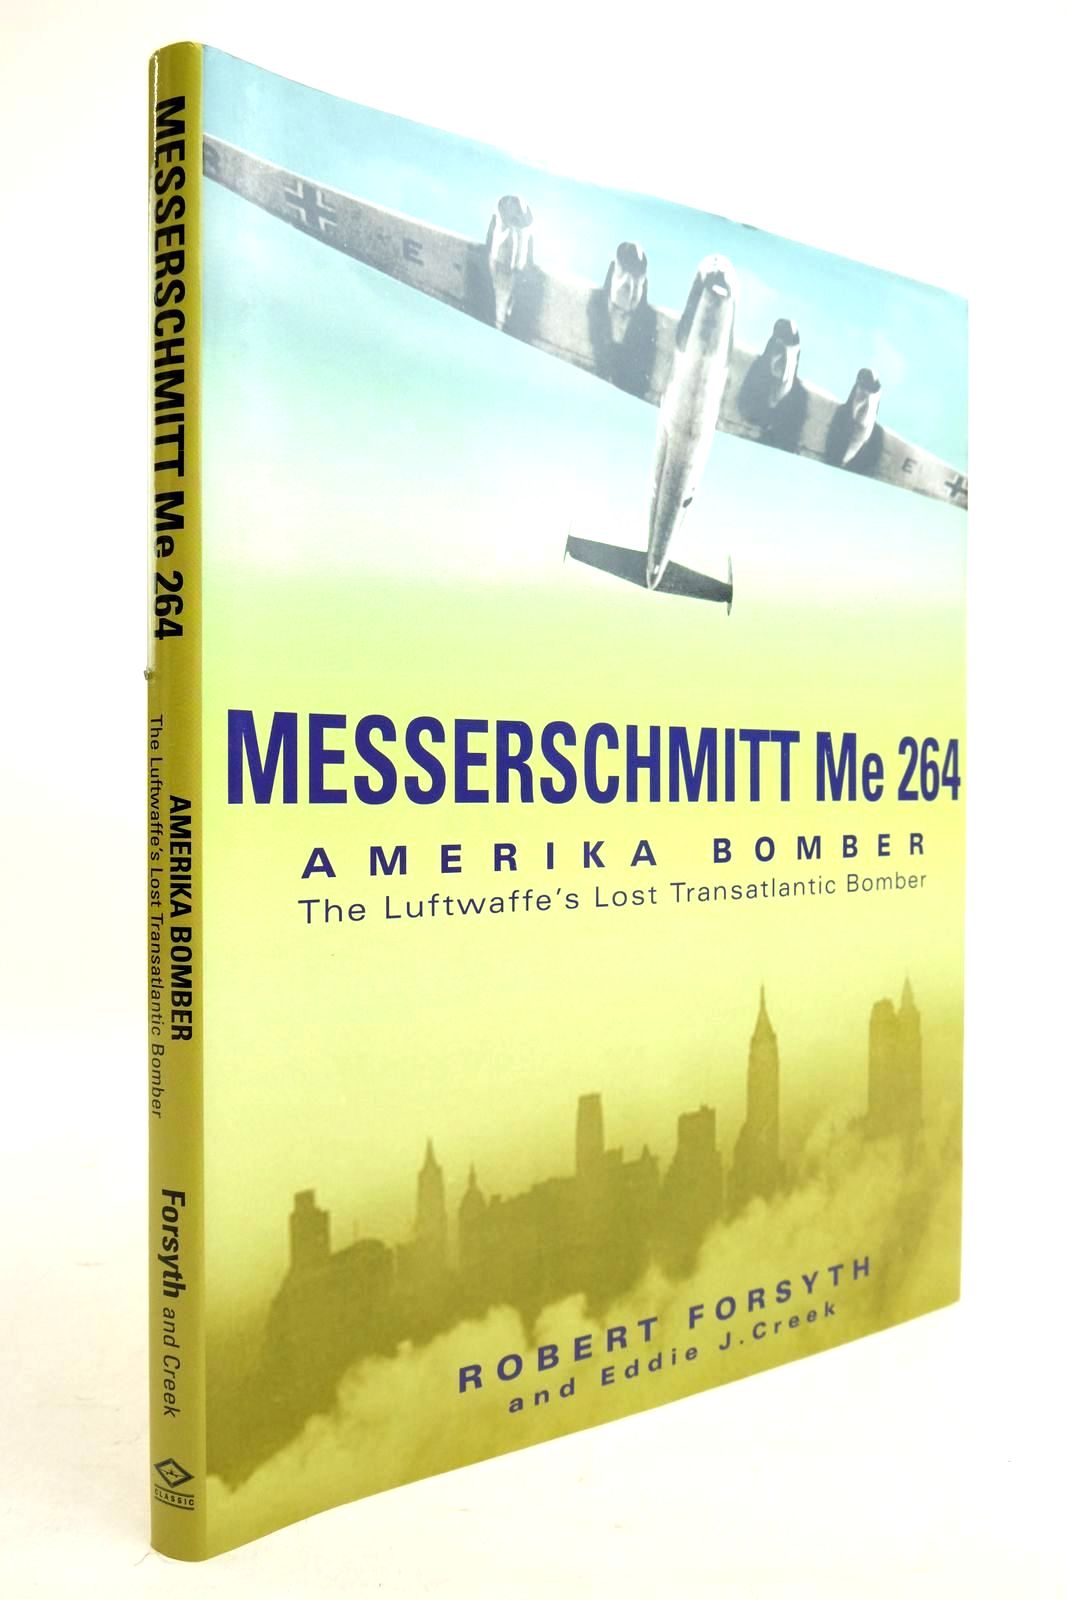 Photo of MESSERSCHMITT ME264 AMERIKA BOMBER written by Forsyth, Robert Creek, E.J. published by Classic Publications (STOCK CODE: 2134507)  for sale by Stella & Rose's Books